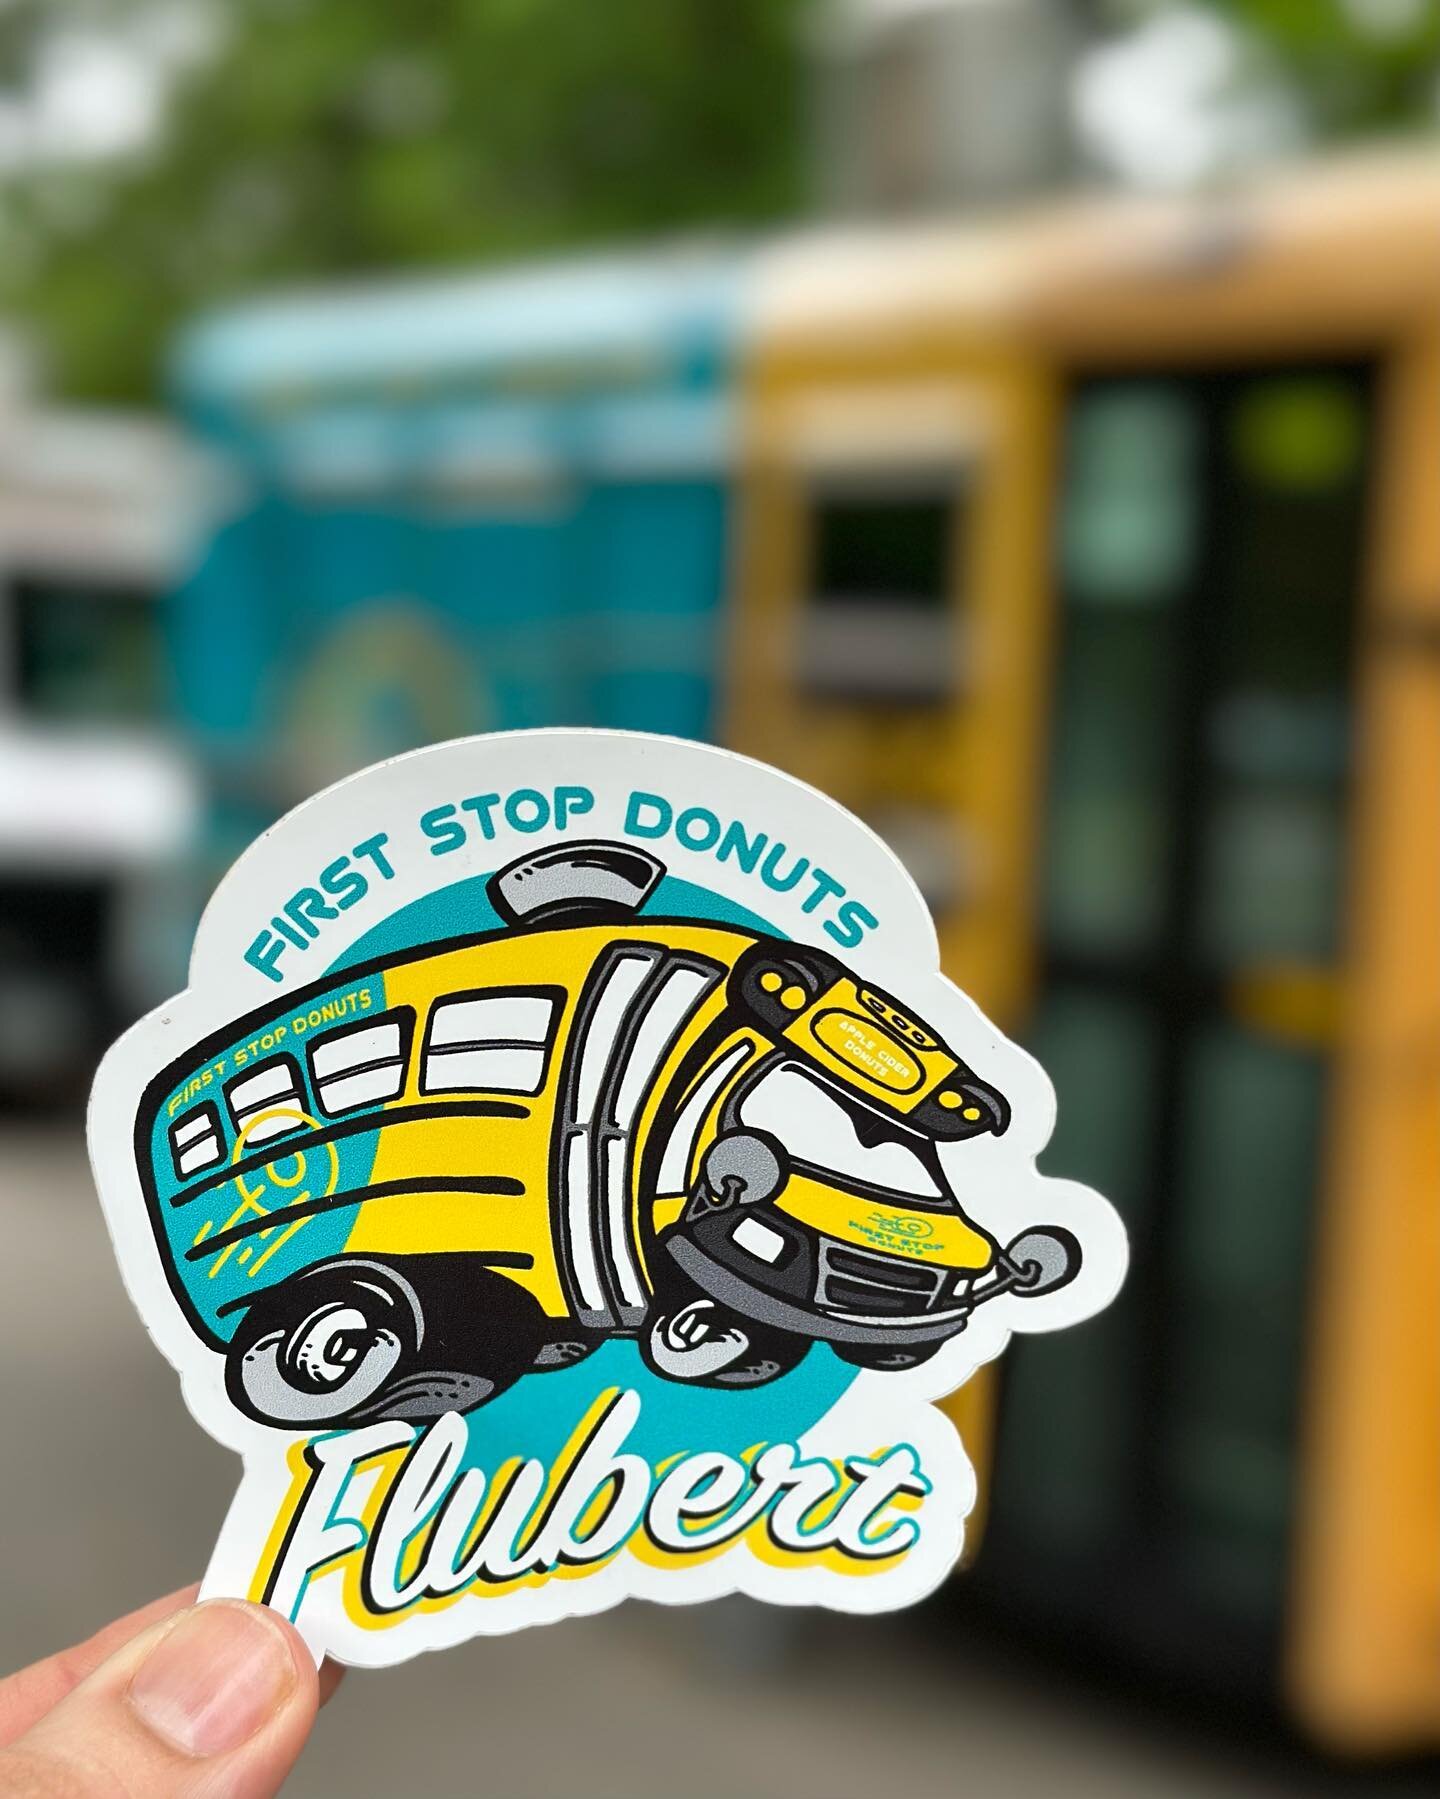 TIME CHANGE + a long post with some updates..

-Starting this Saturday 5/6 the RVA Big Market moves back to summer hours, 8am-12pm. 

EARLY BIRD: come between 8-9am this Sat and mention this post for a Freshh Flubert sticker with your order! 🚌💨

Su